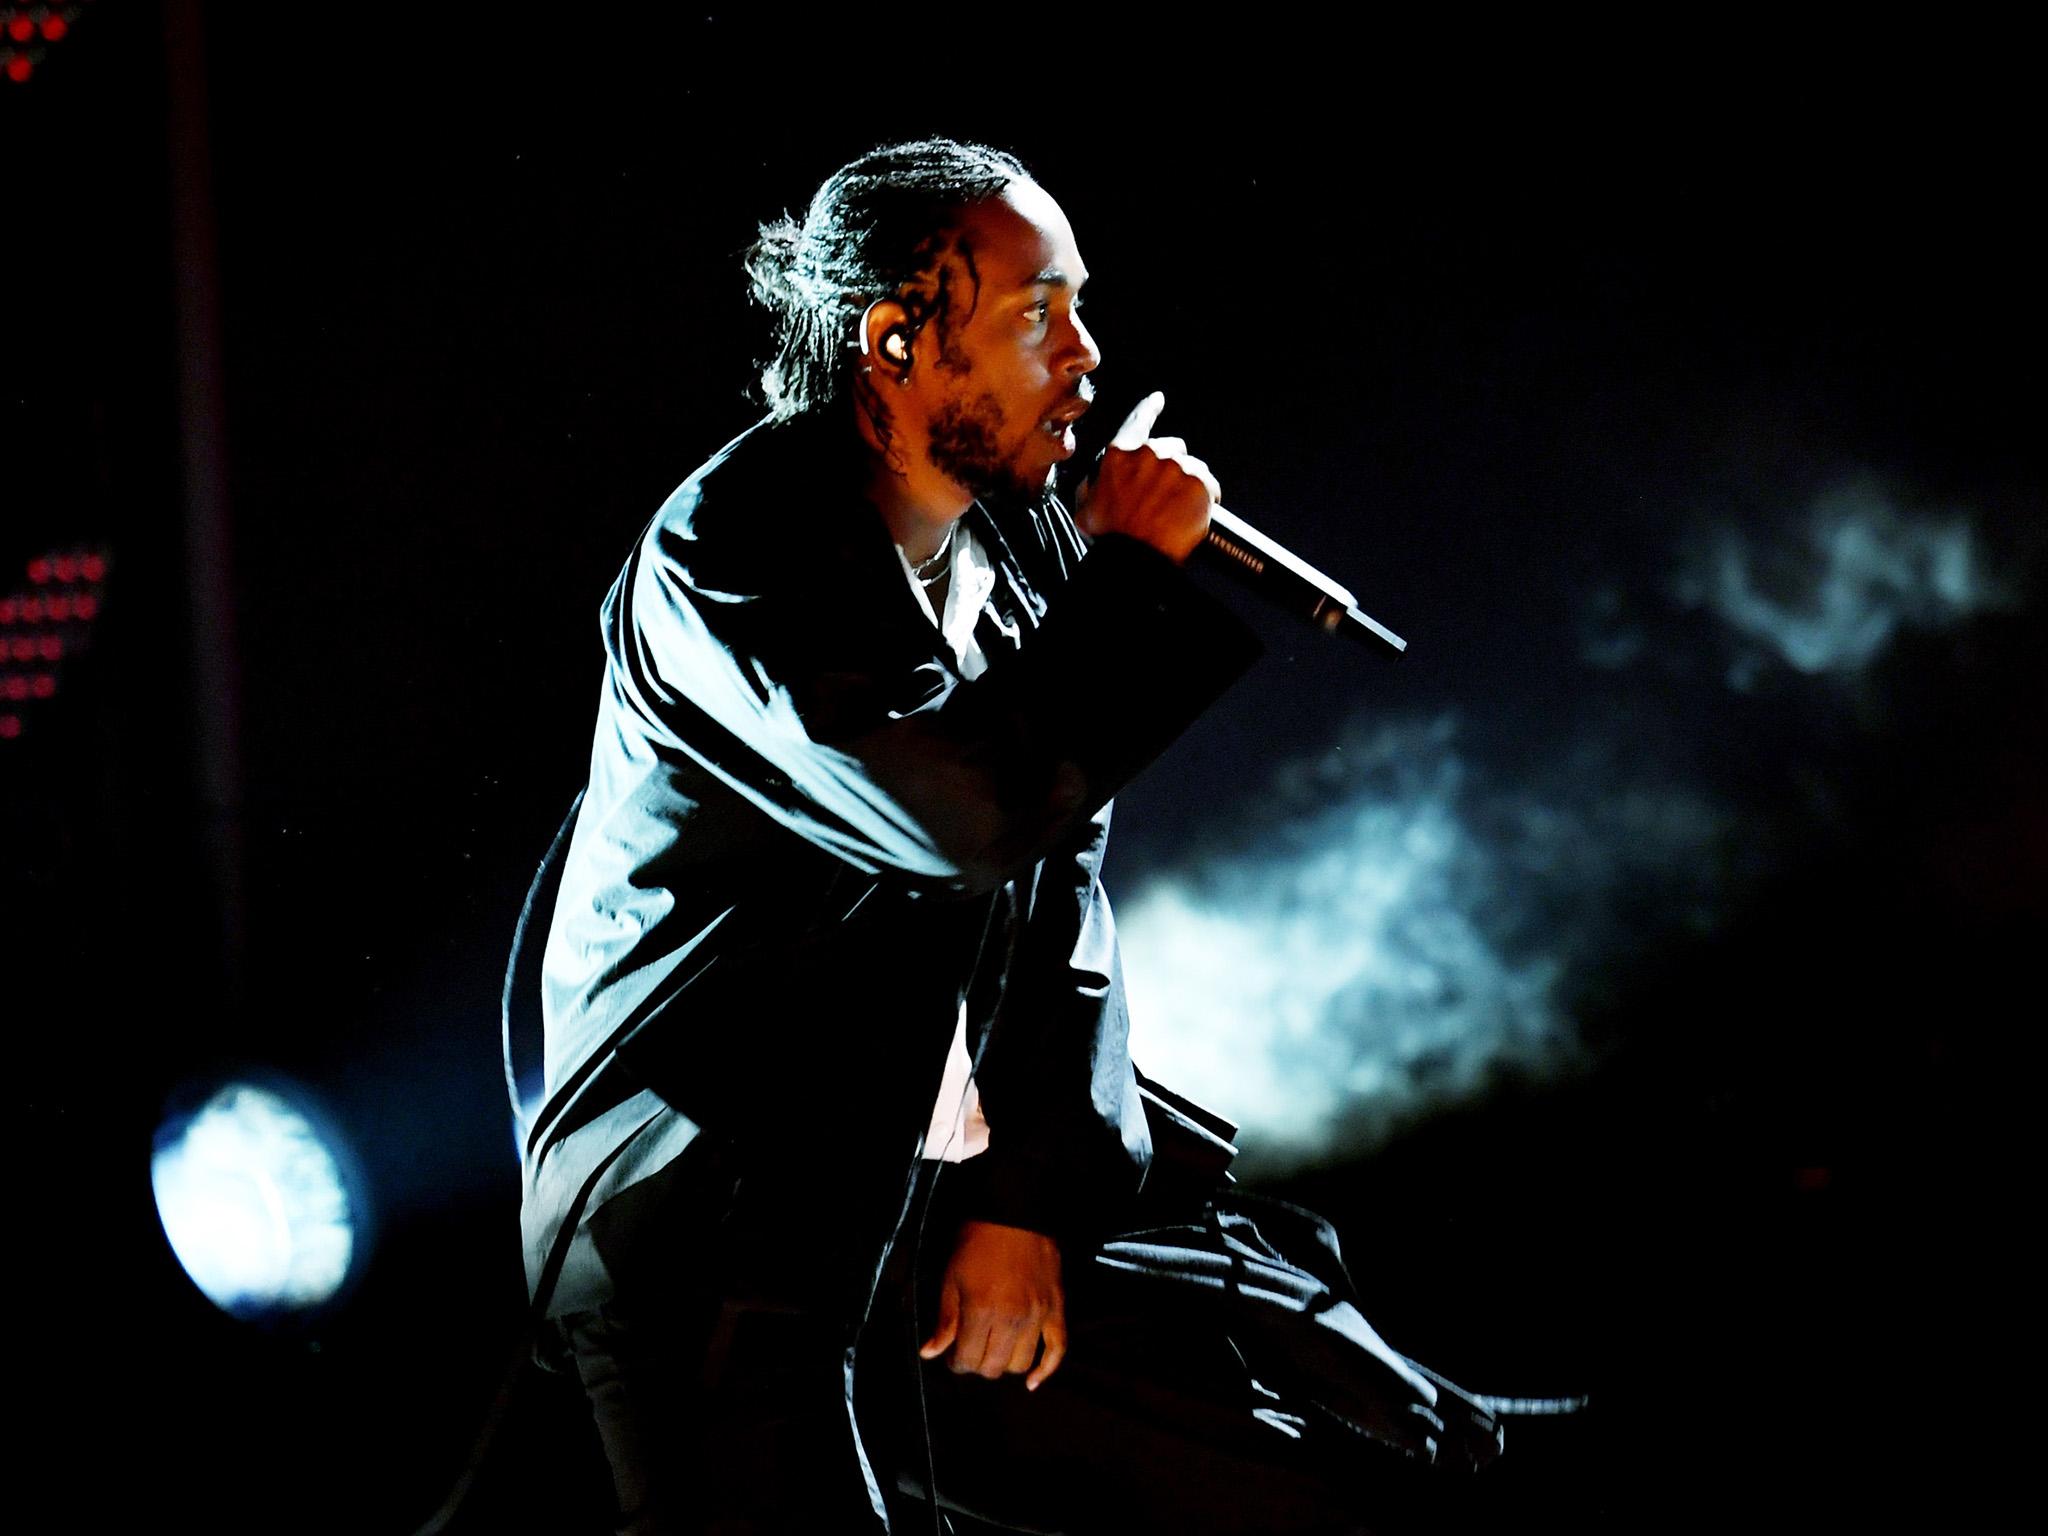 How Super Bowl LVI Halftime Show Could Kickoff With New Kendrick Lamar Song